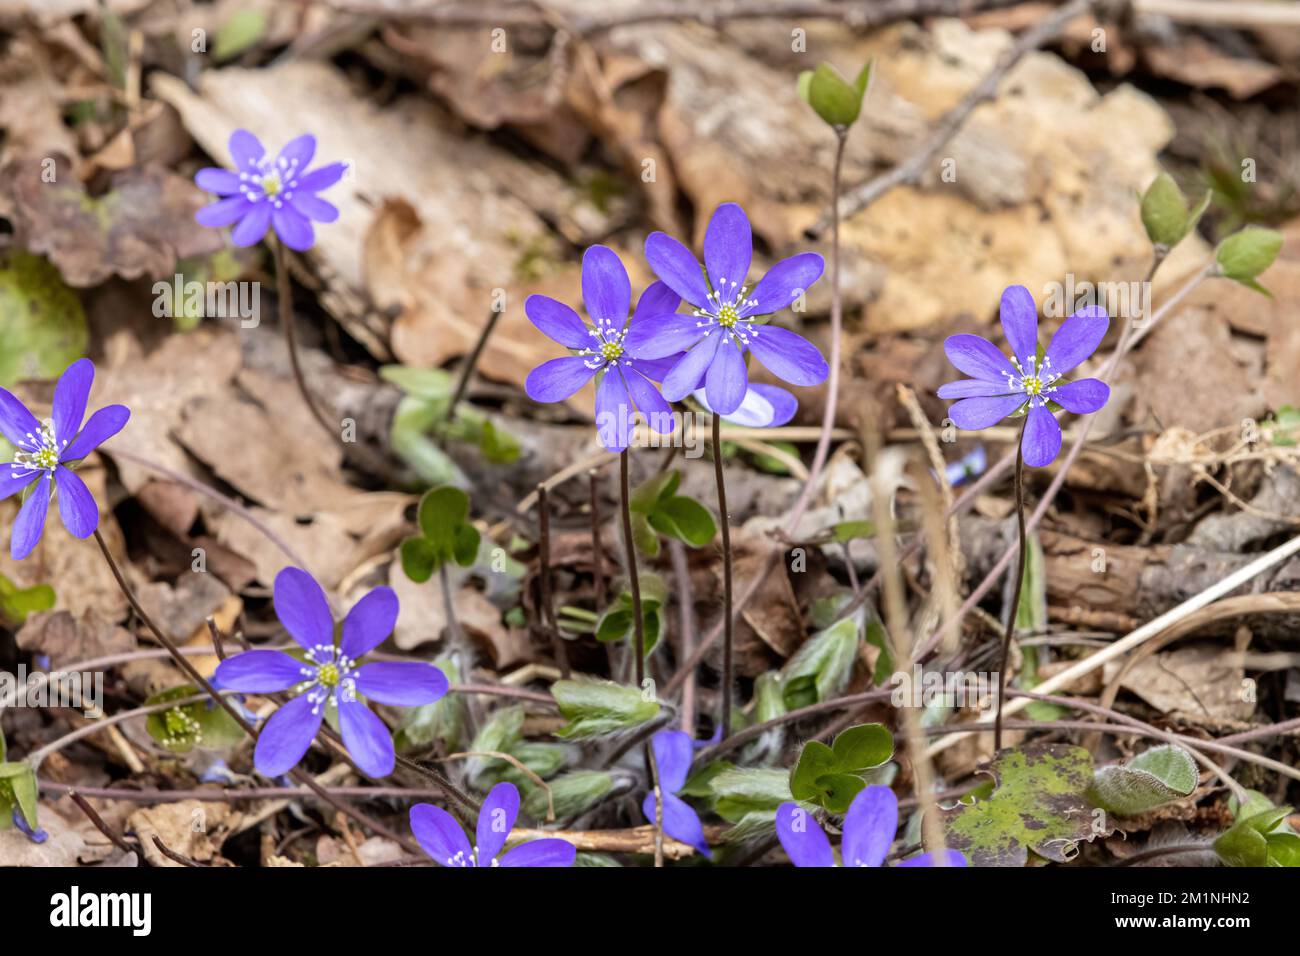 blue anemones in nature growing wild Stock Photo